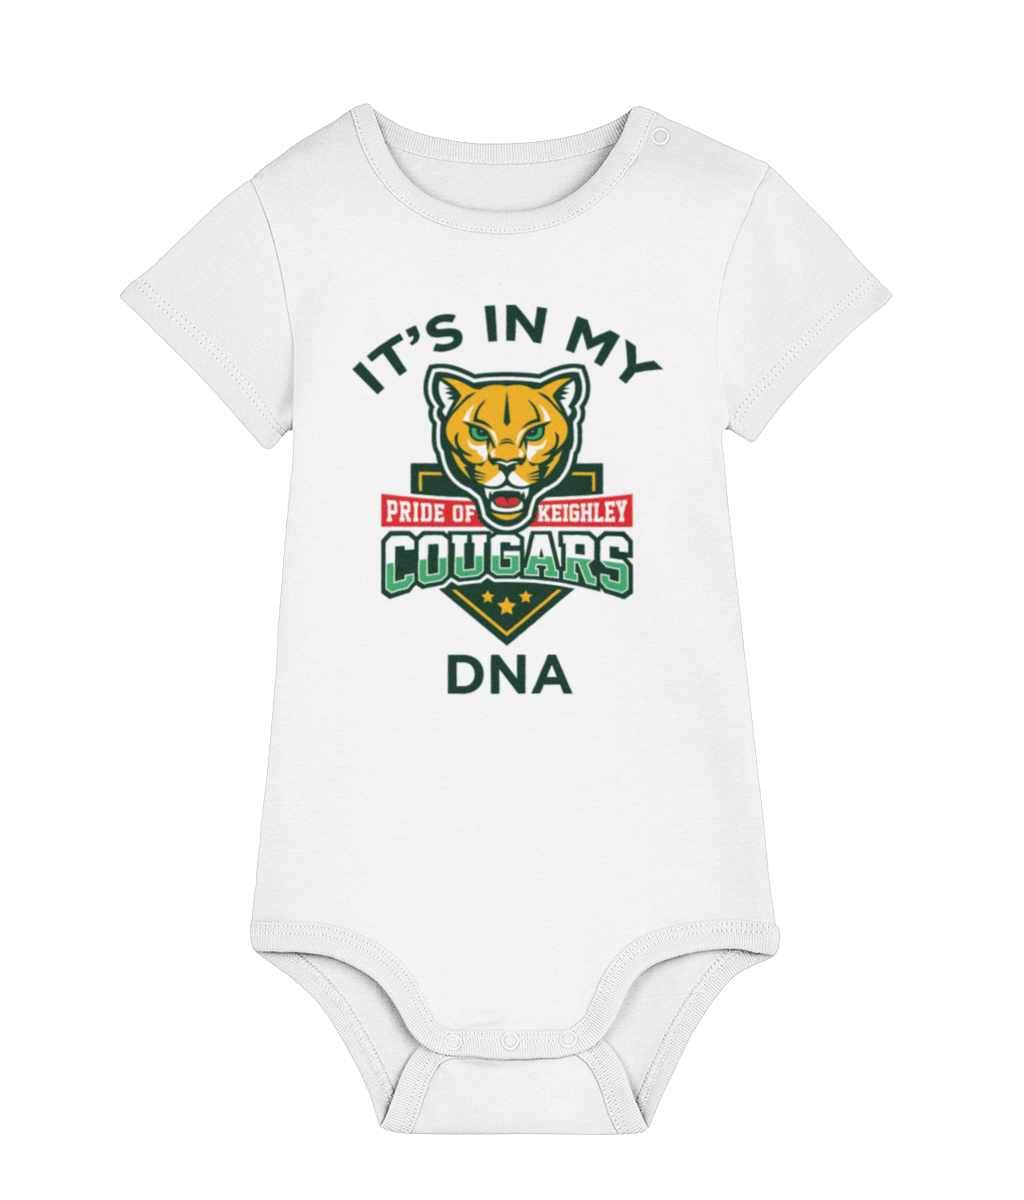 Keighley Cougars DNA Baby Body Suit in White